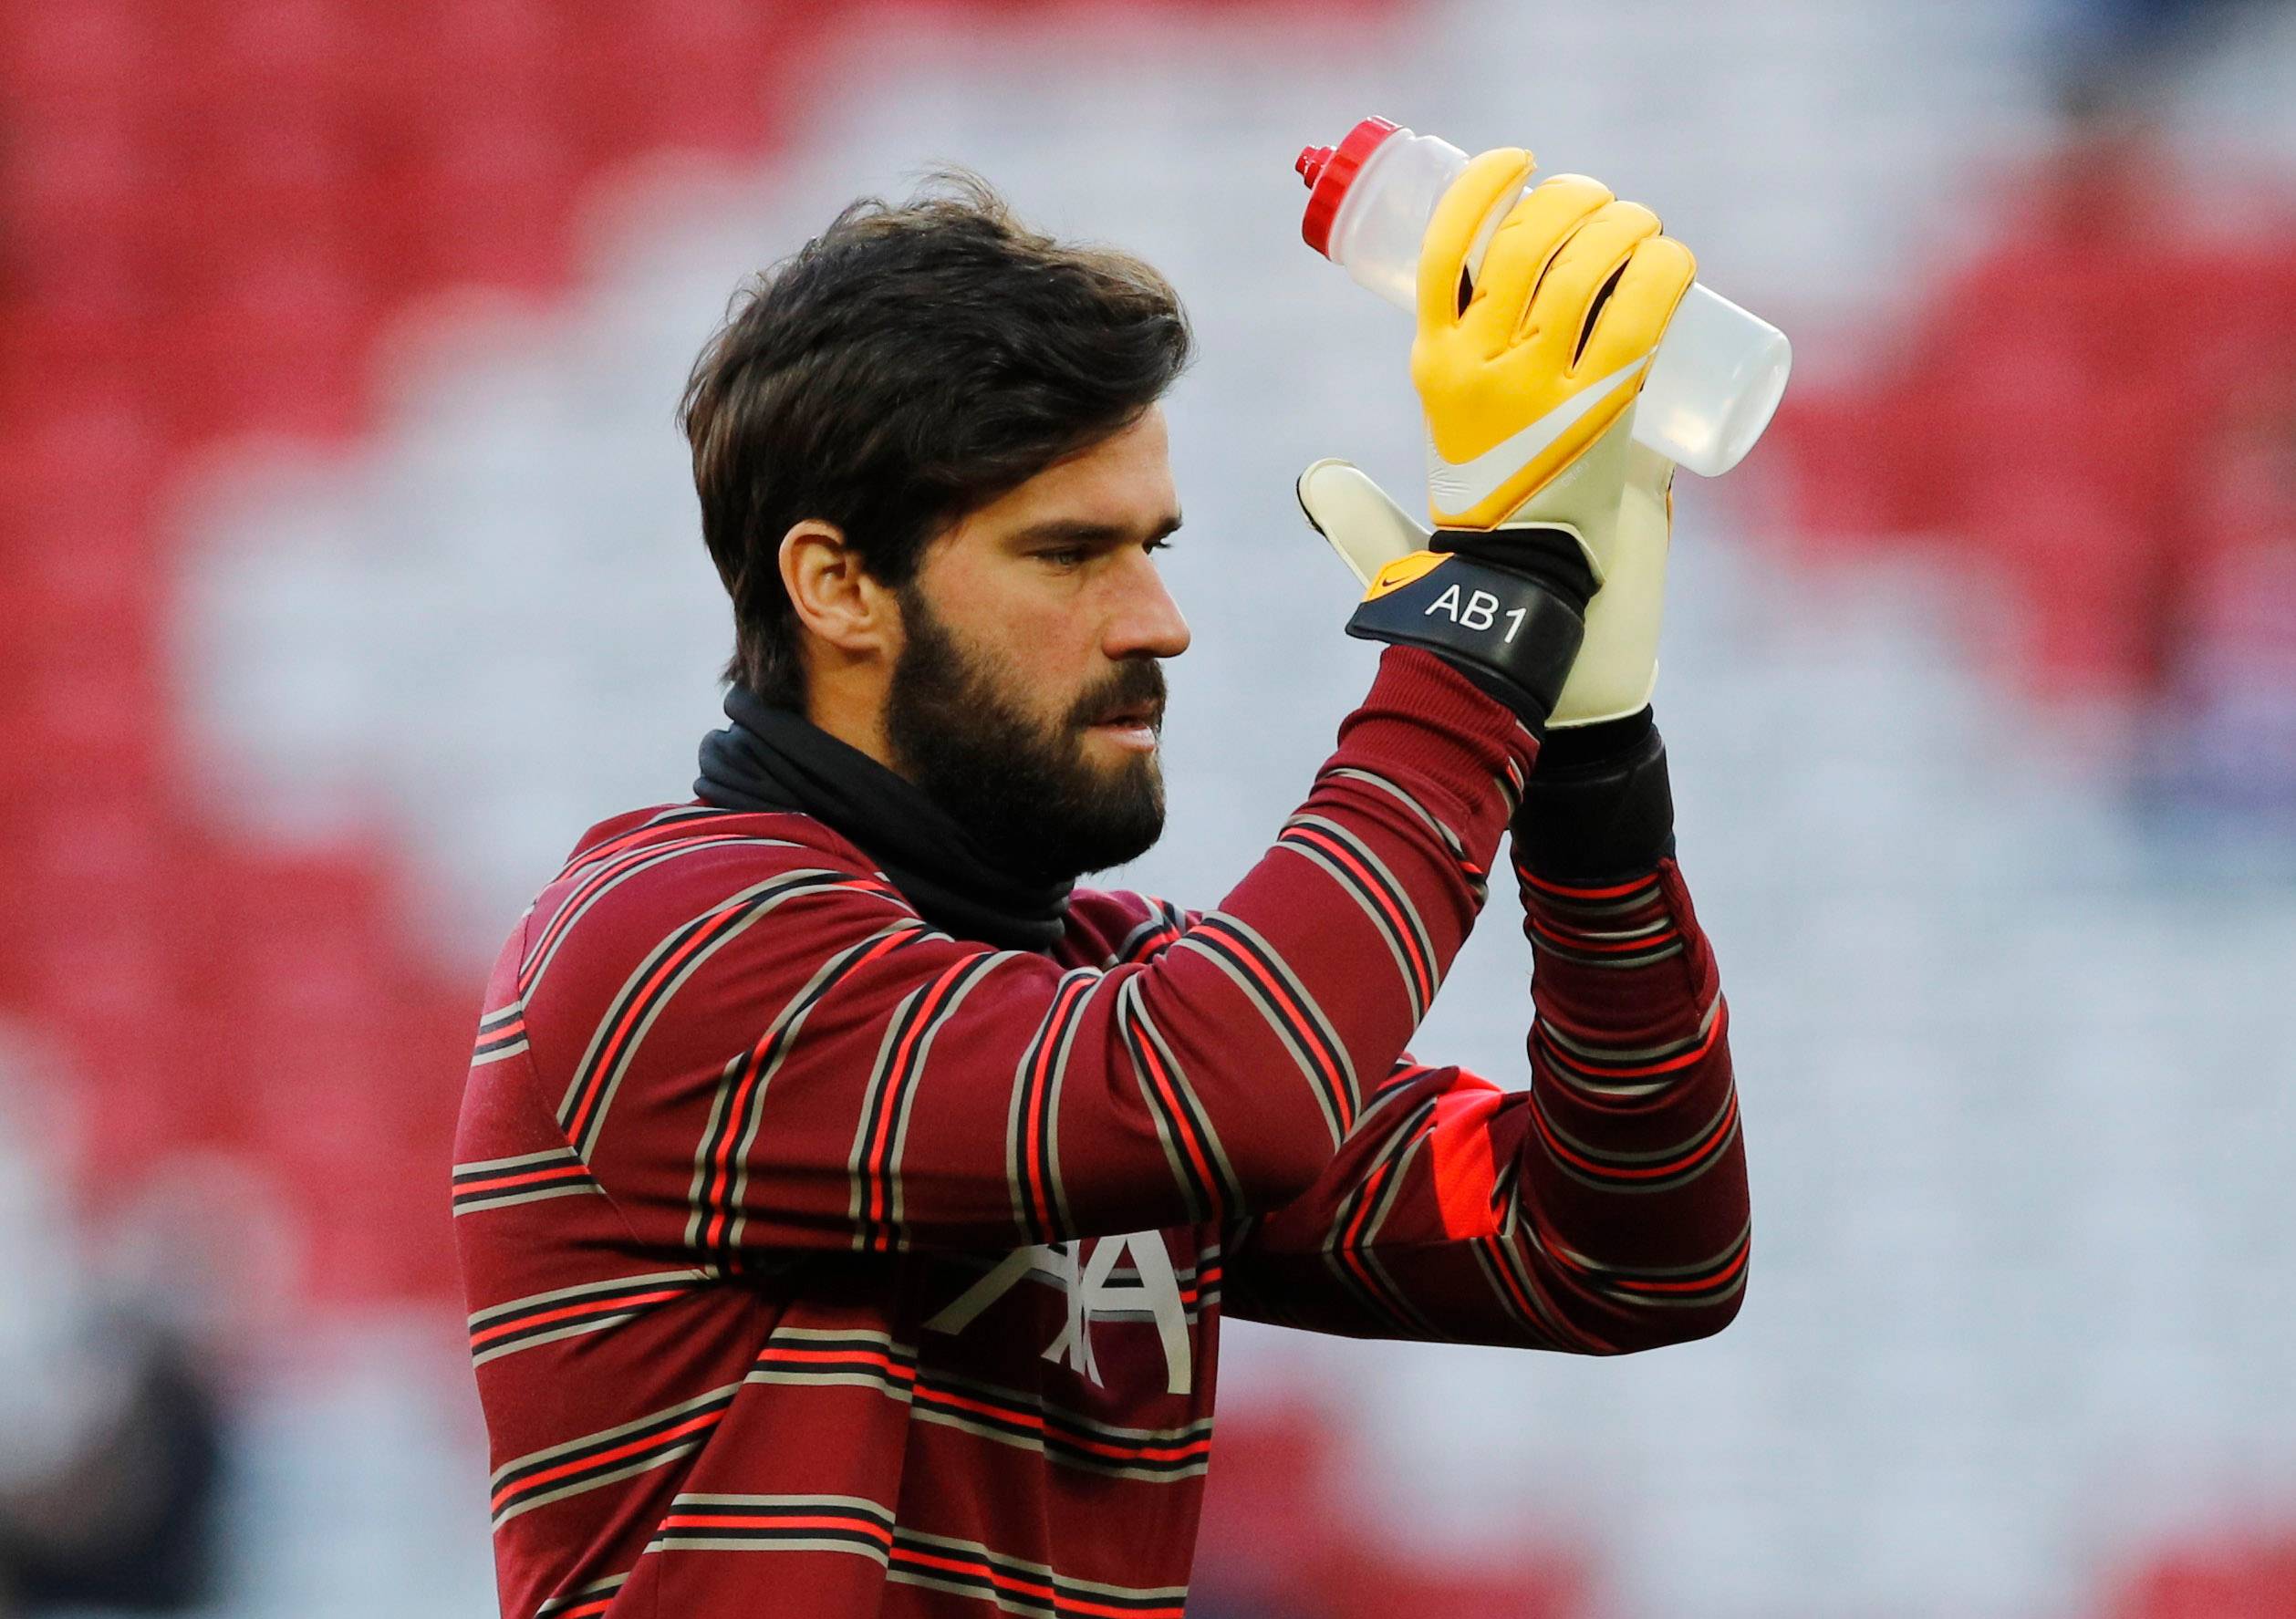 Liverpool's Alisson clapping.